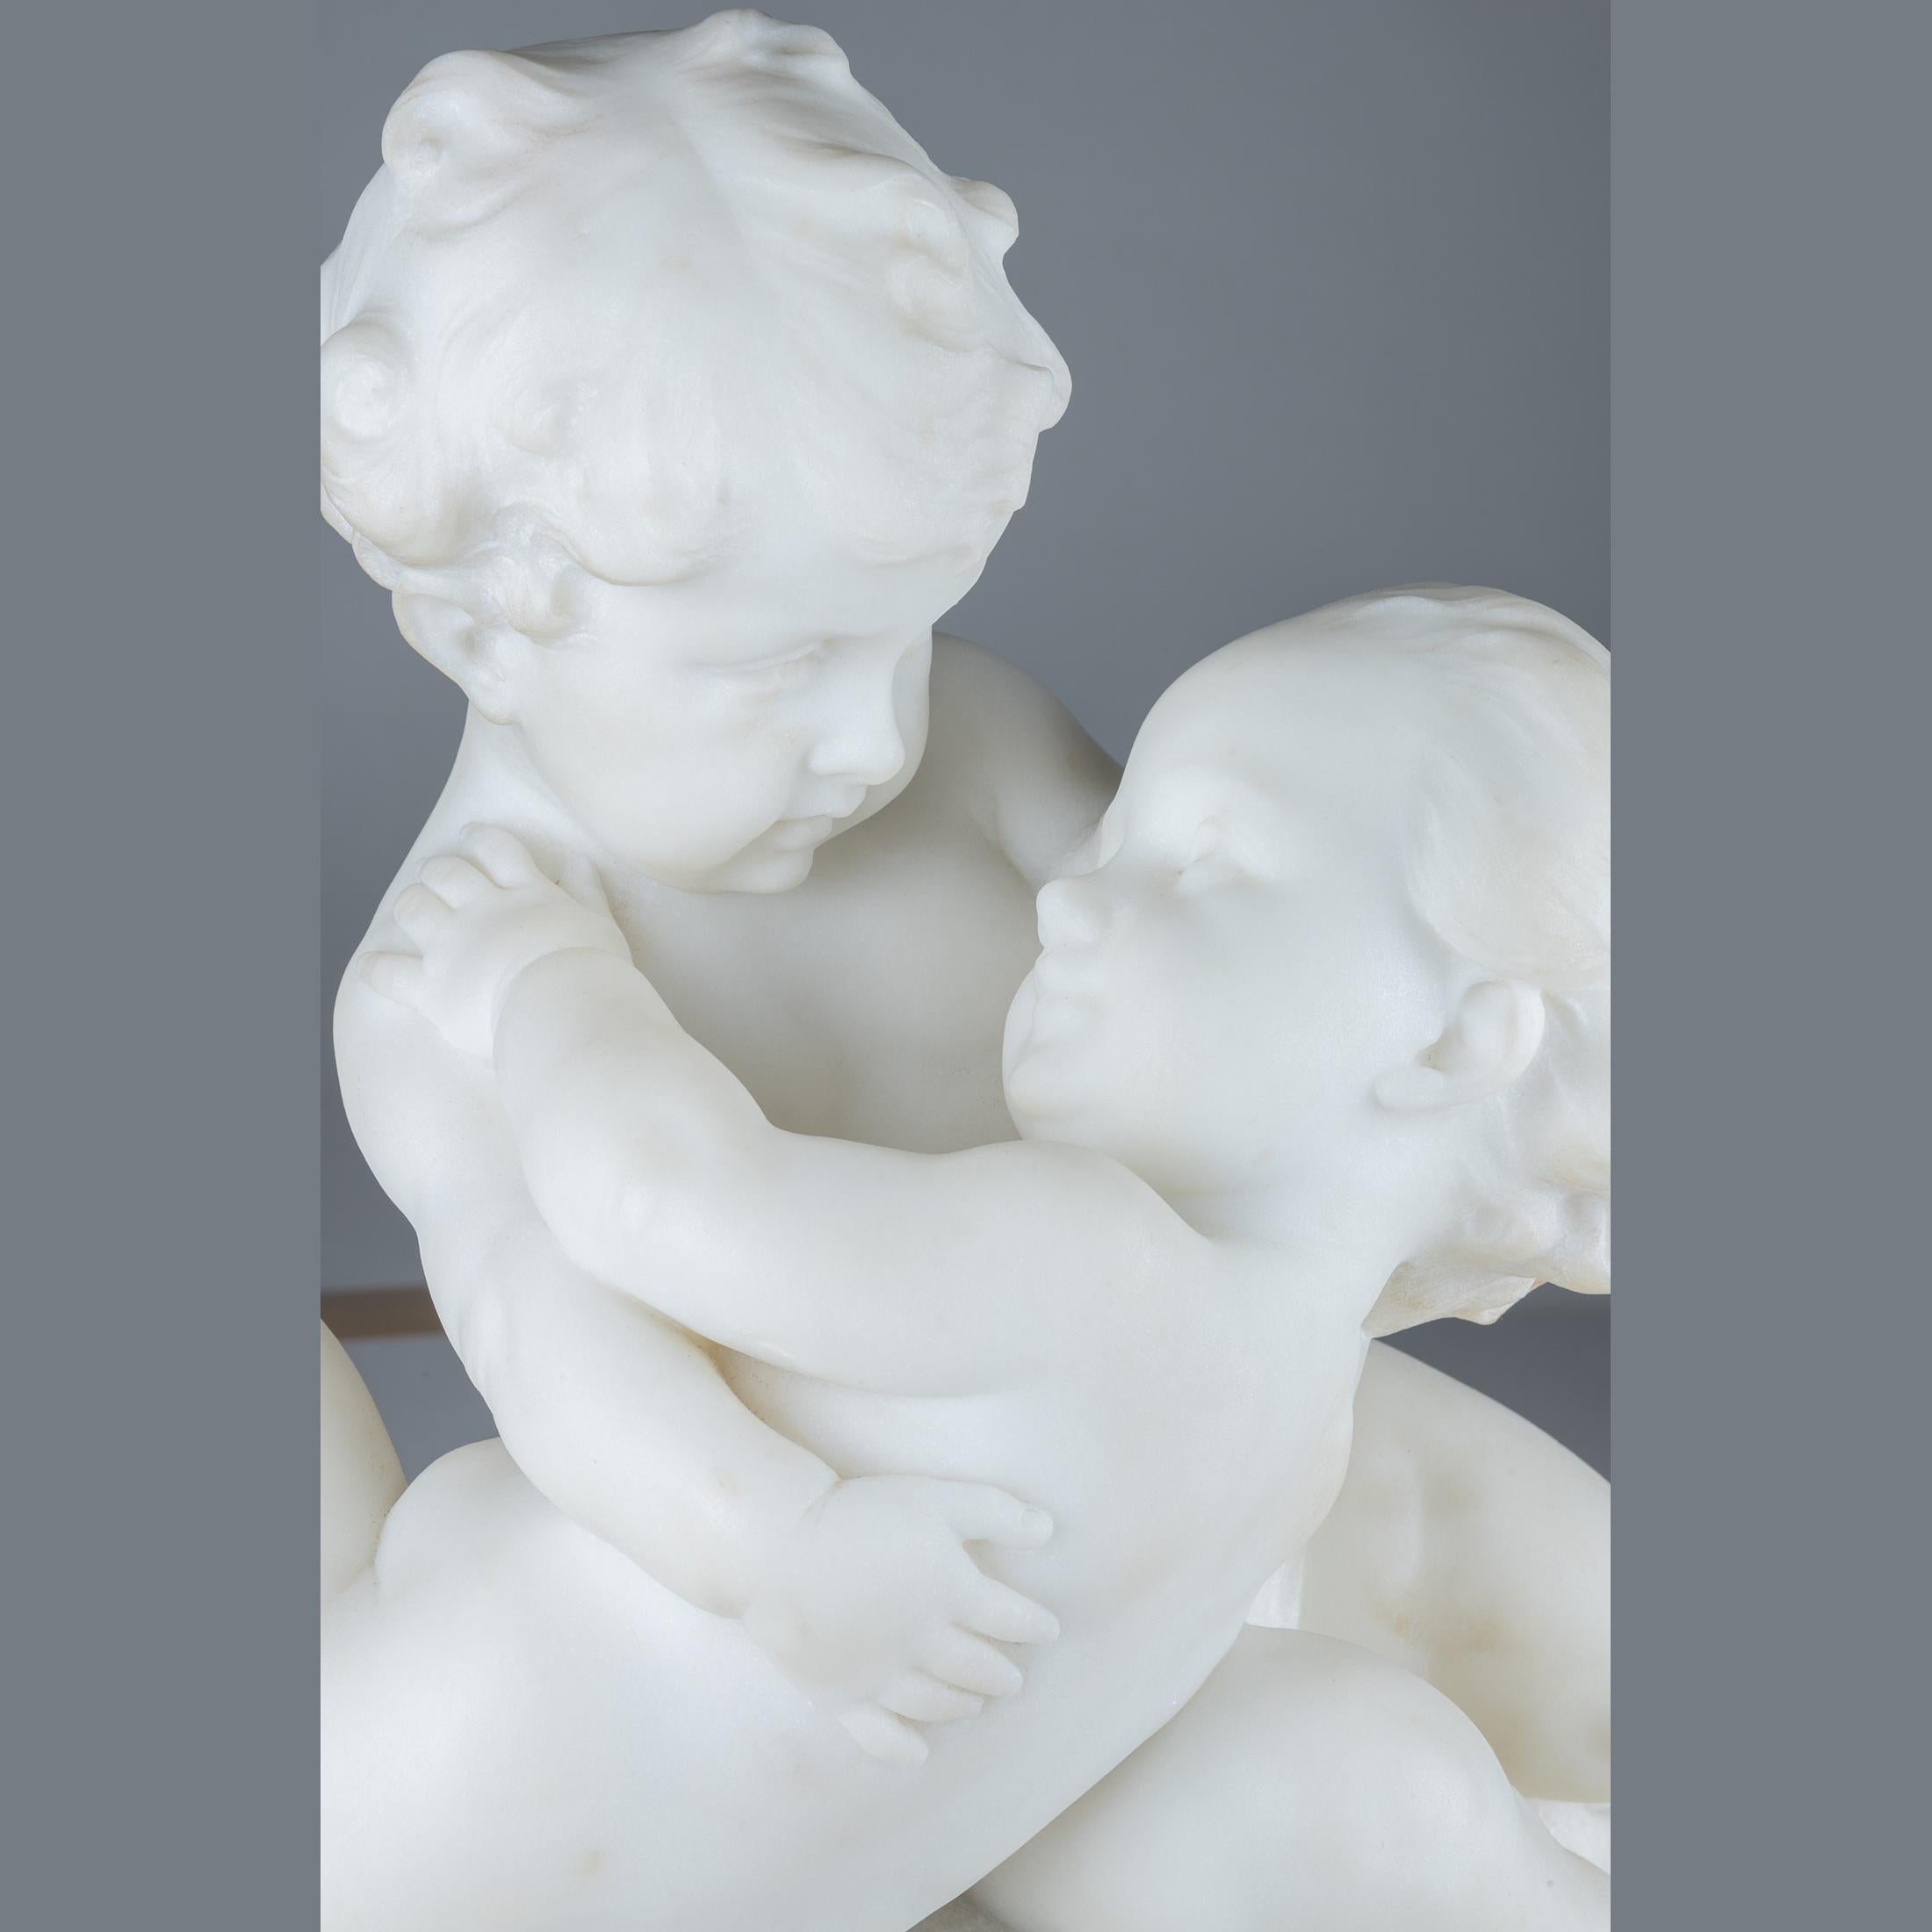 19th Century Italian White Marble Sculpture of Two Cherubs Embracing by Puji